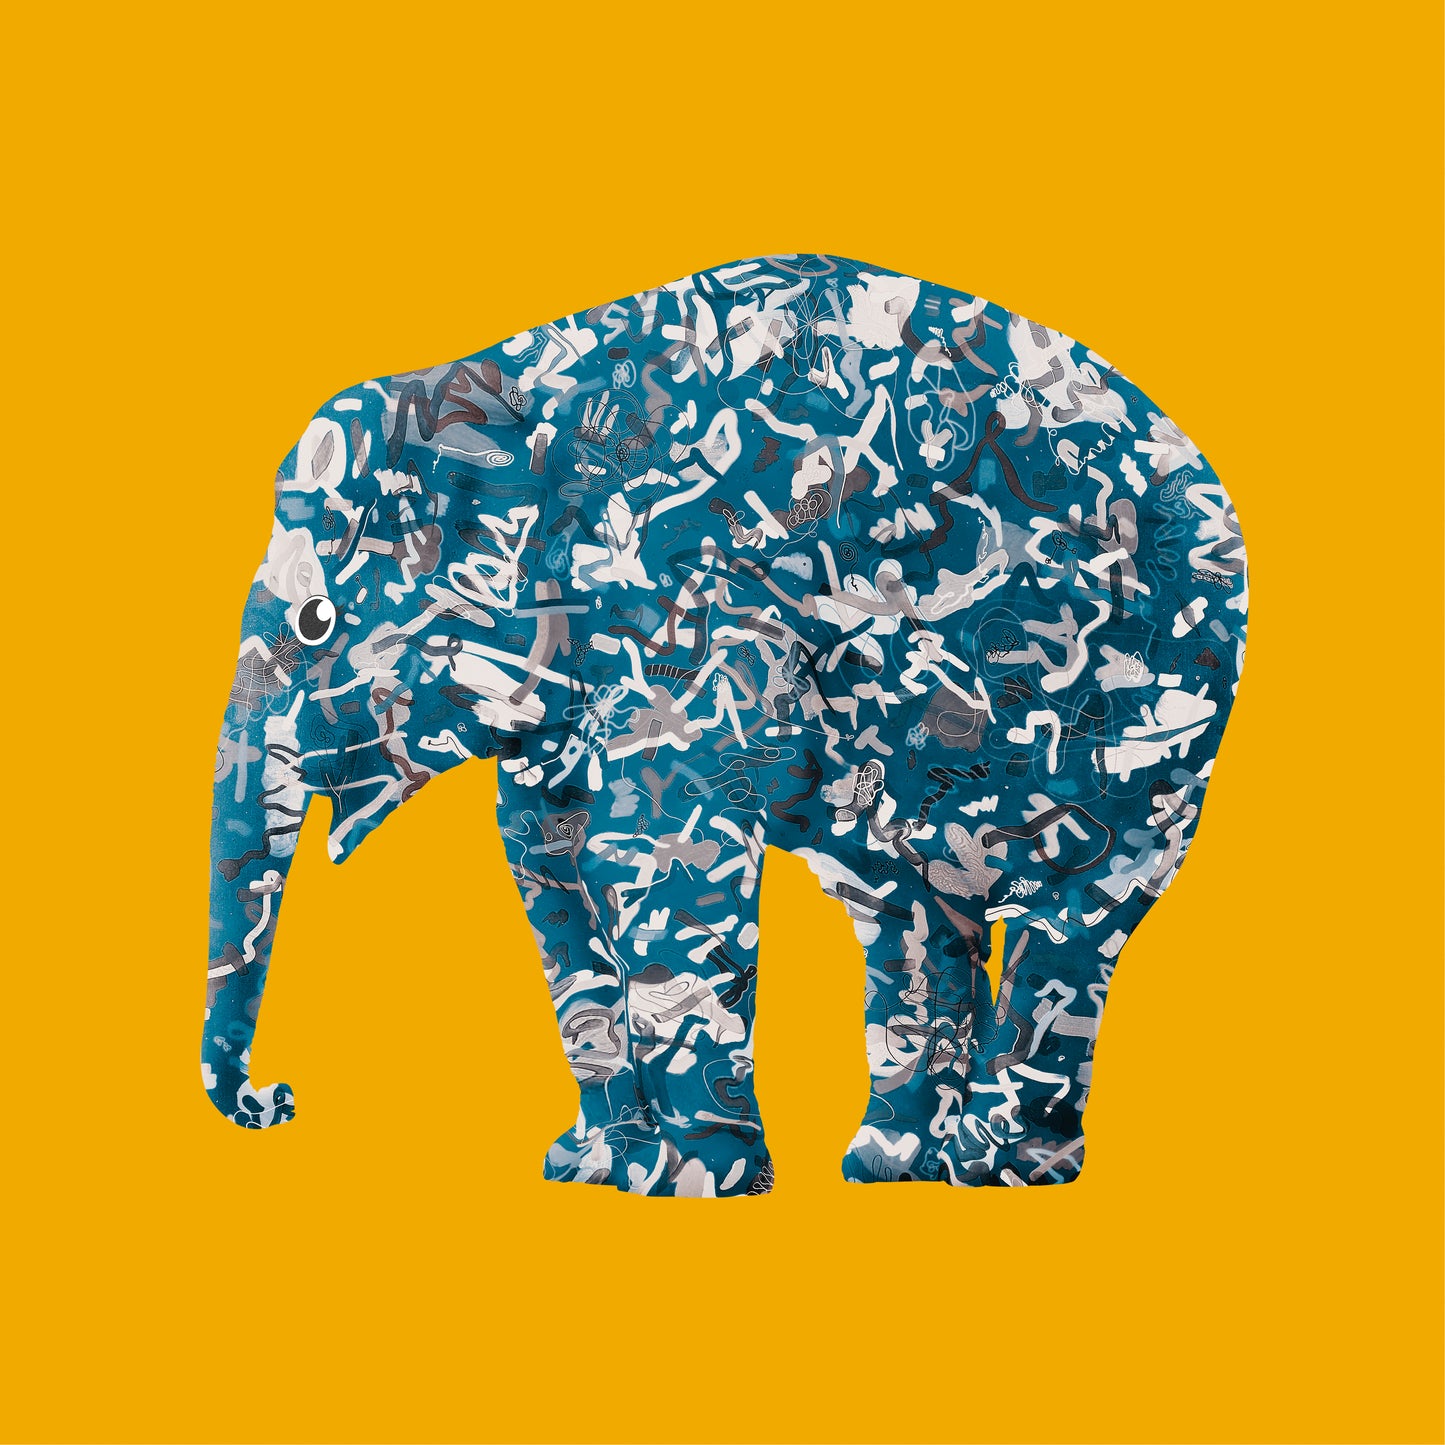 The Migthy Elephants, Yellow R